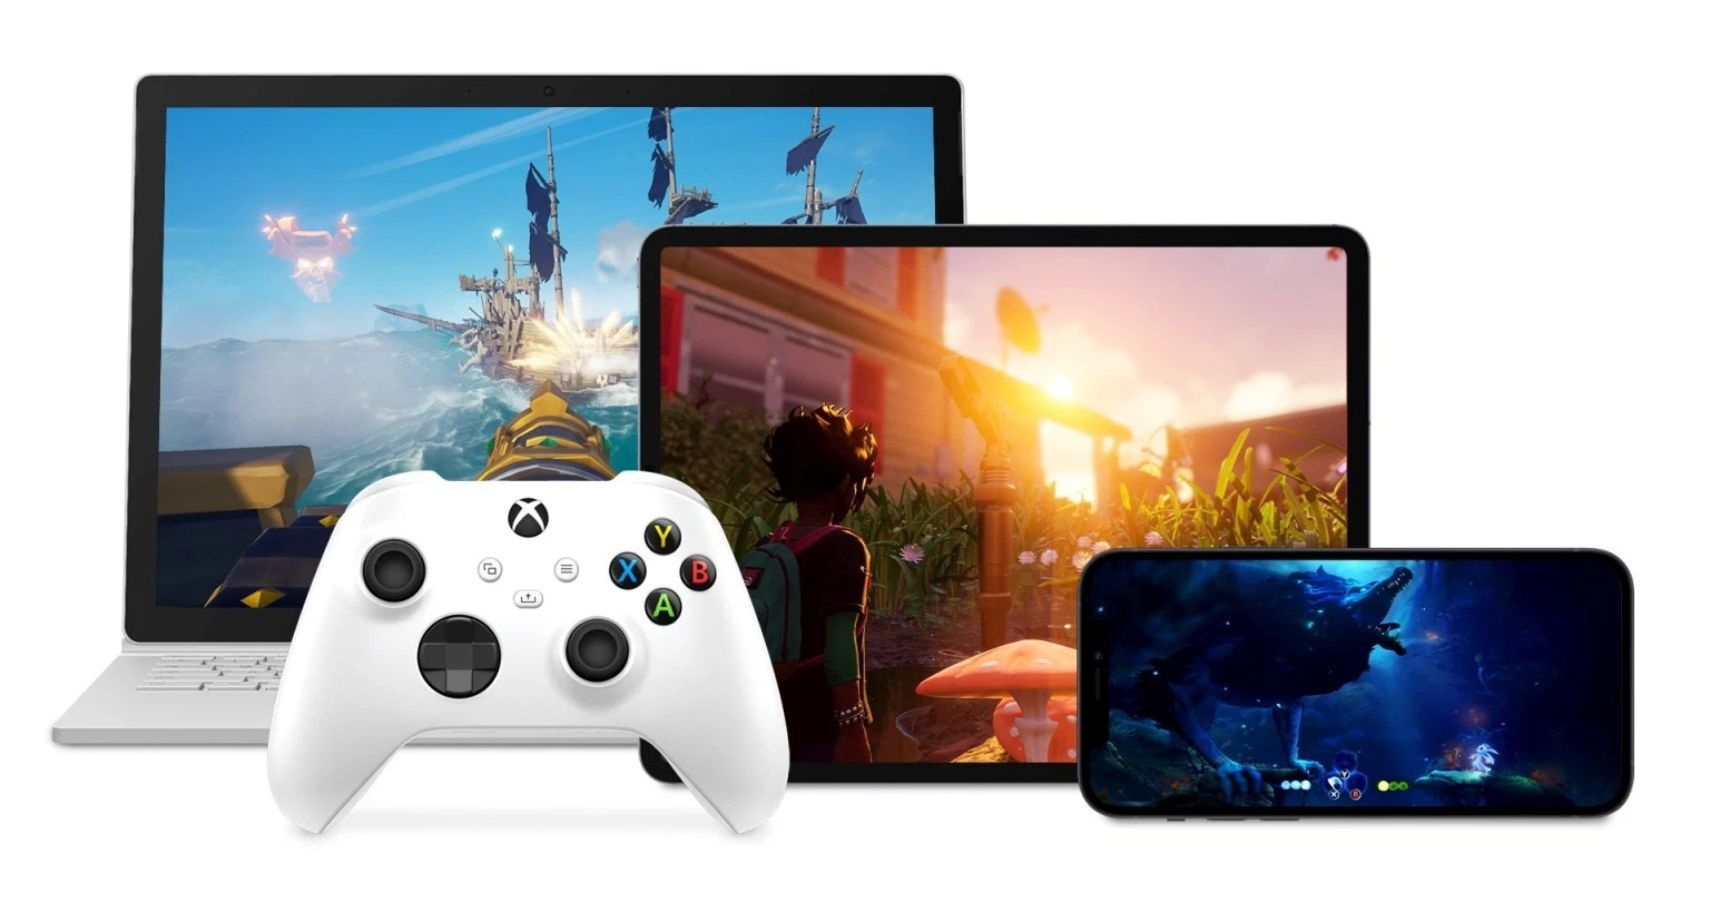 How To Play Xbox Cloud Gaming Beta For PC And iOS